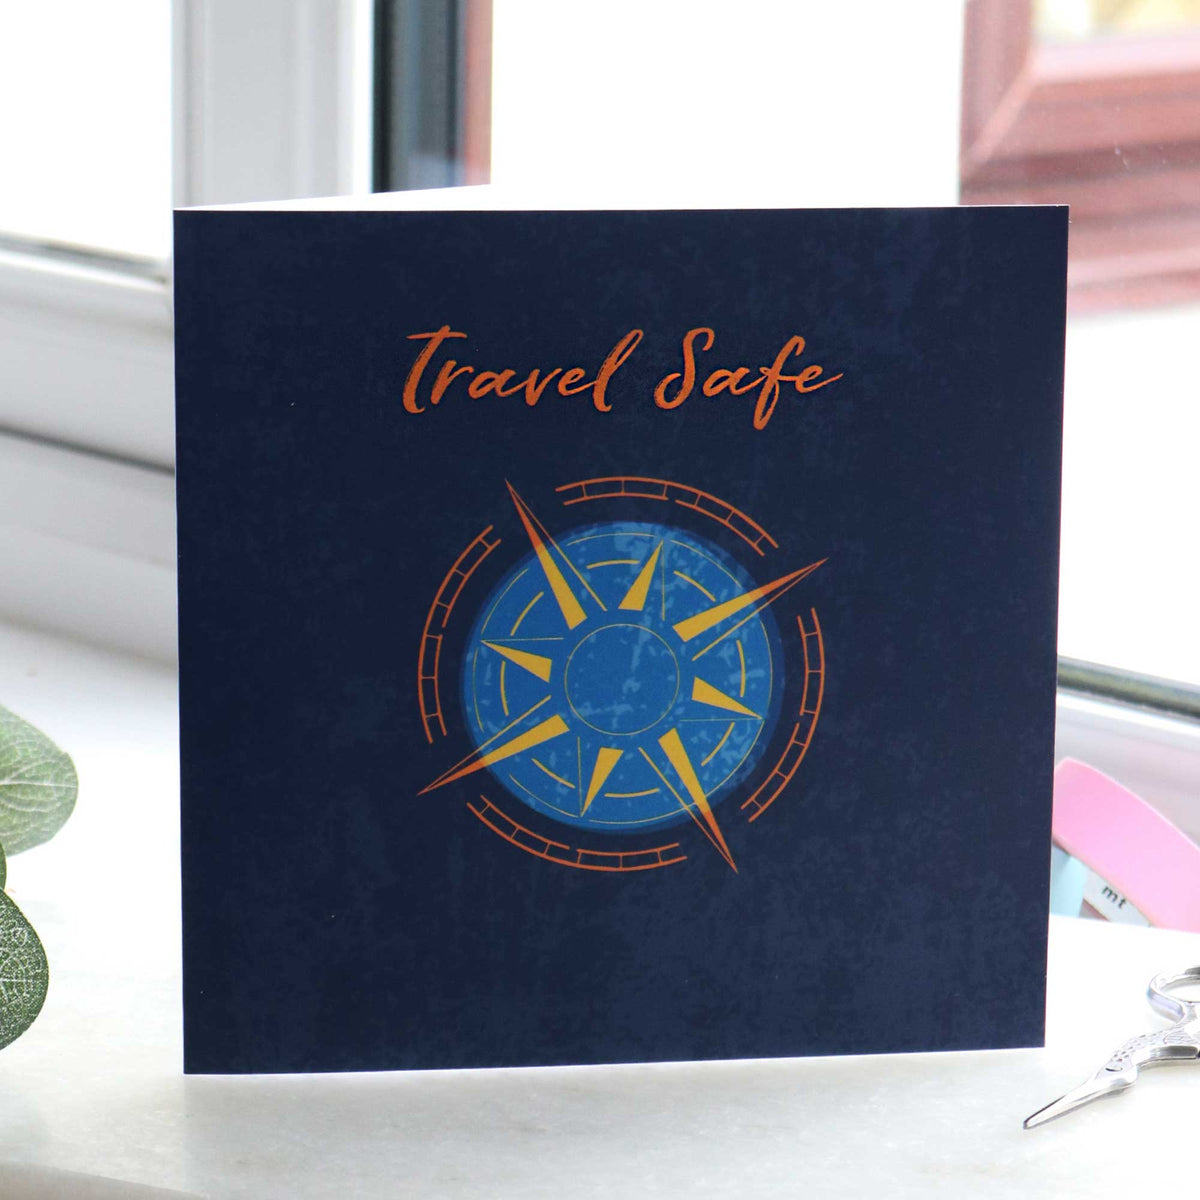 Travel safe going away gift card